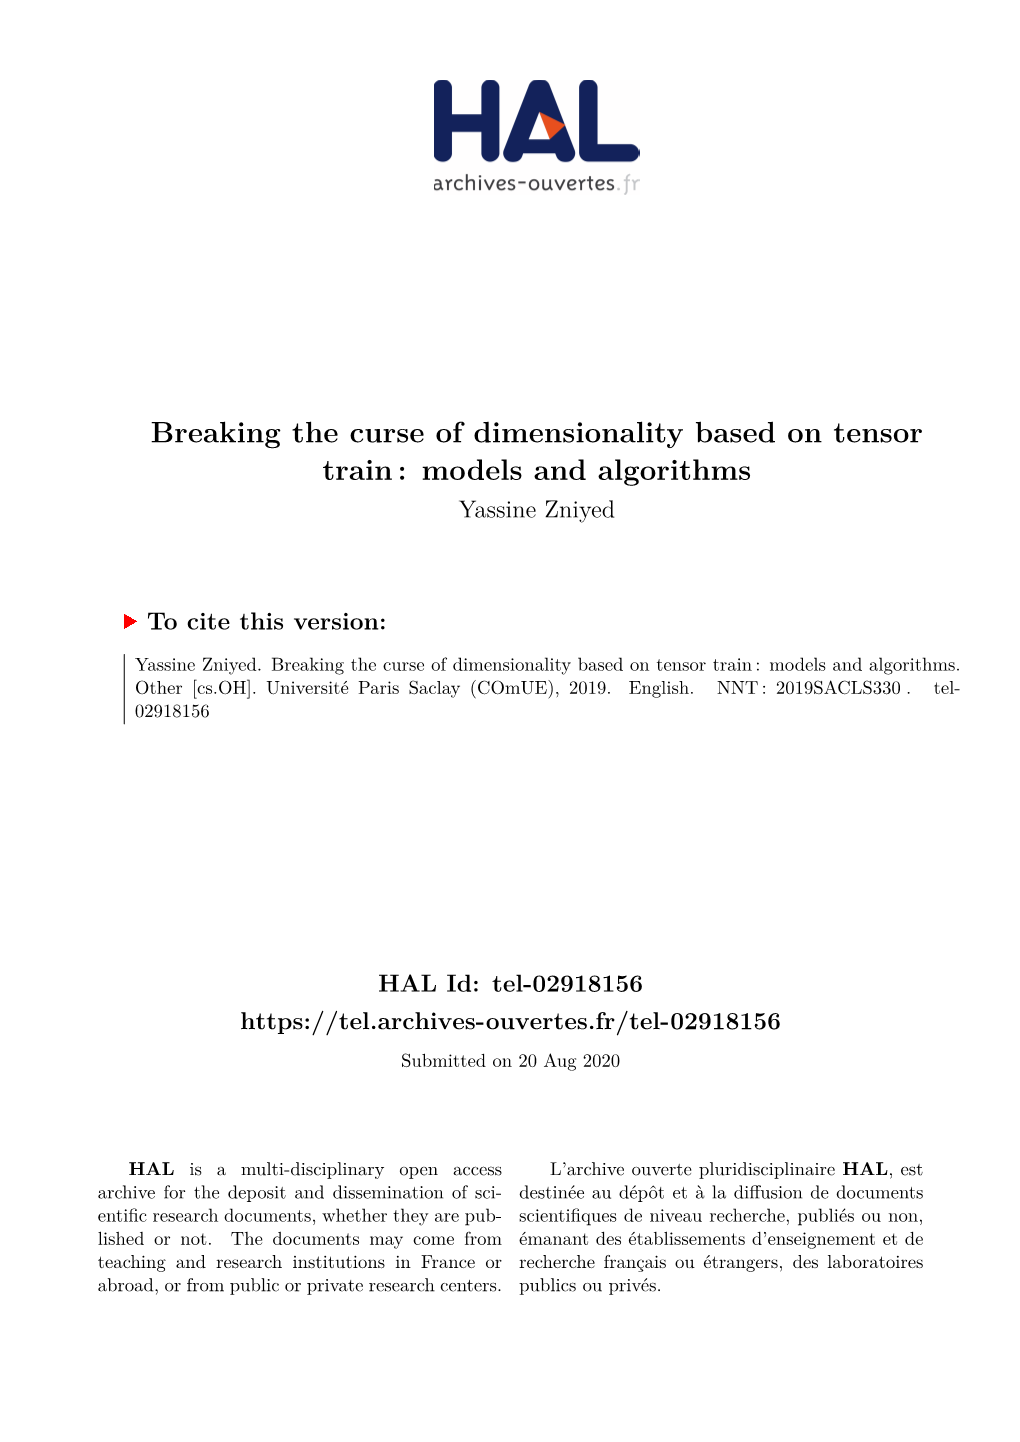 Breaking the Curse of Dimensionality Based on Tensor Train: Models And